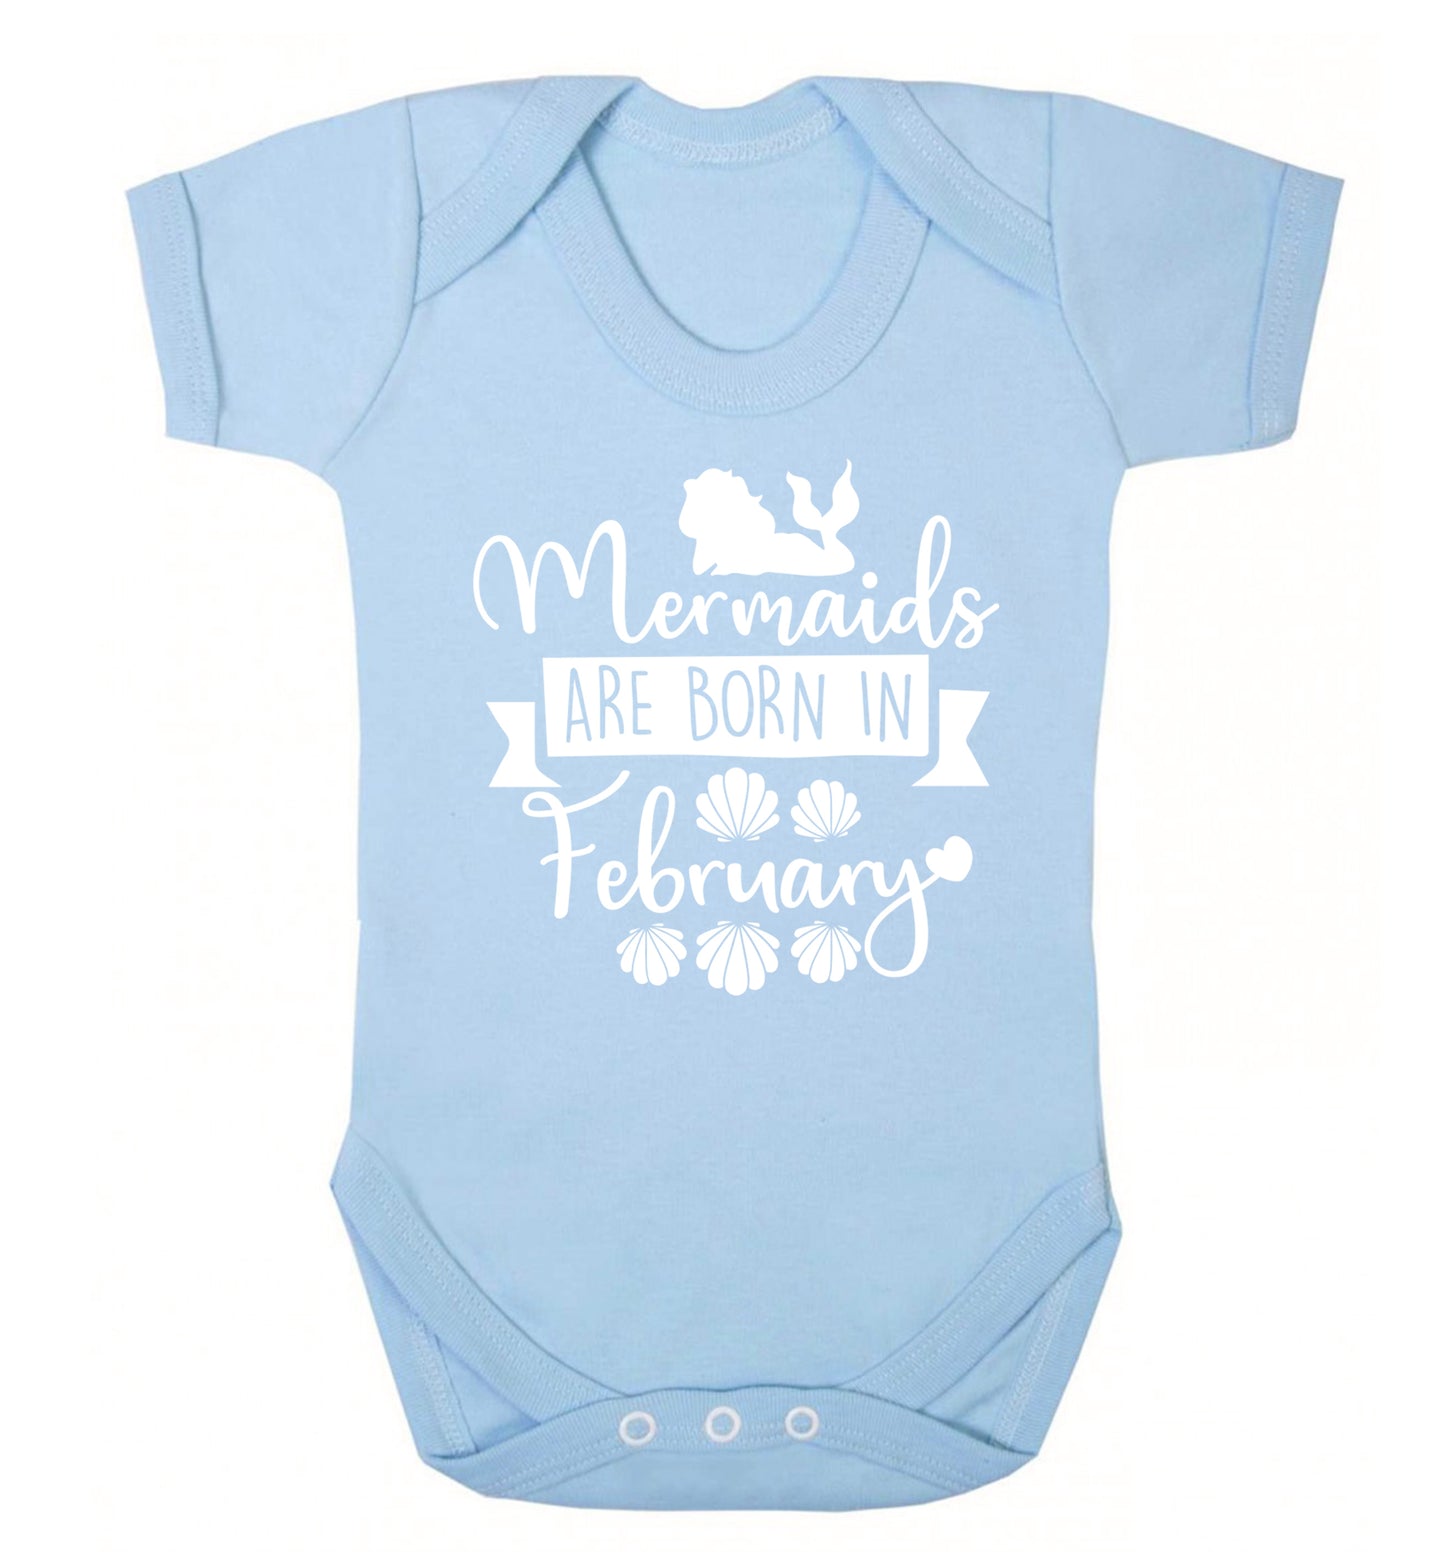 Mermaids are born in February Baby Vest pale blue 18-24 months